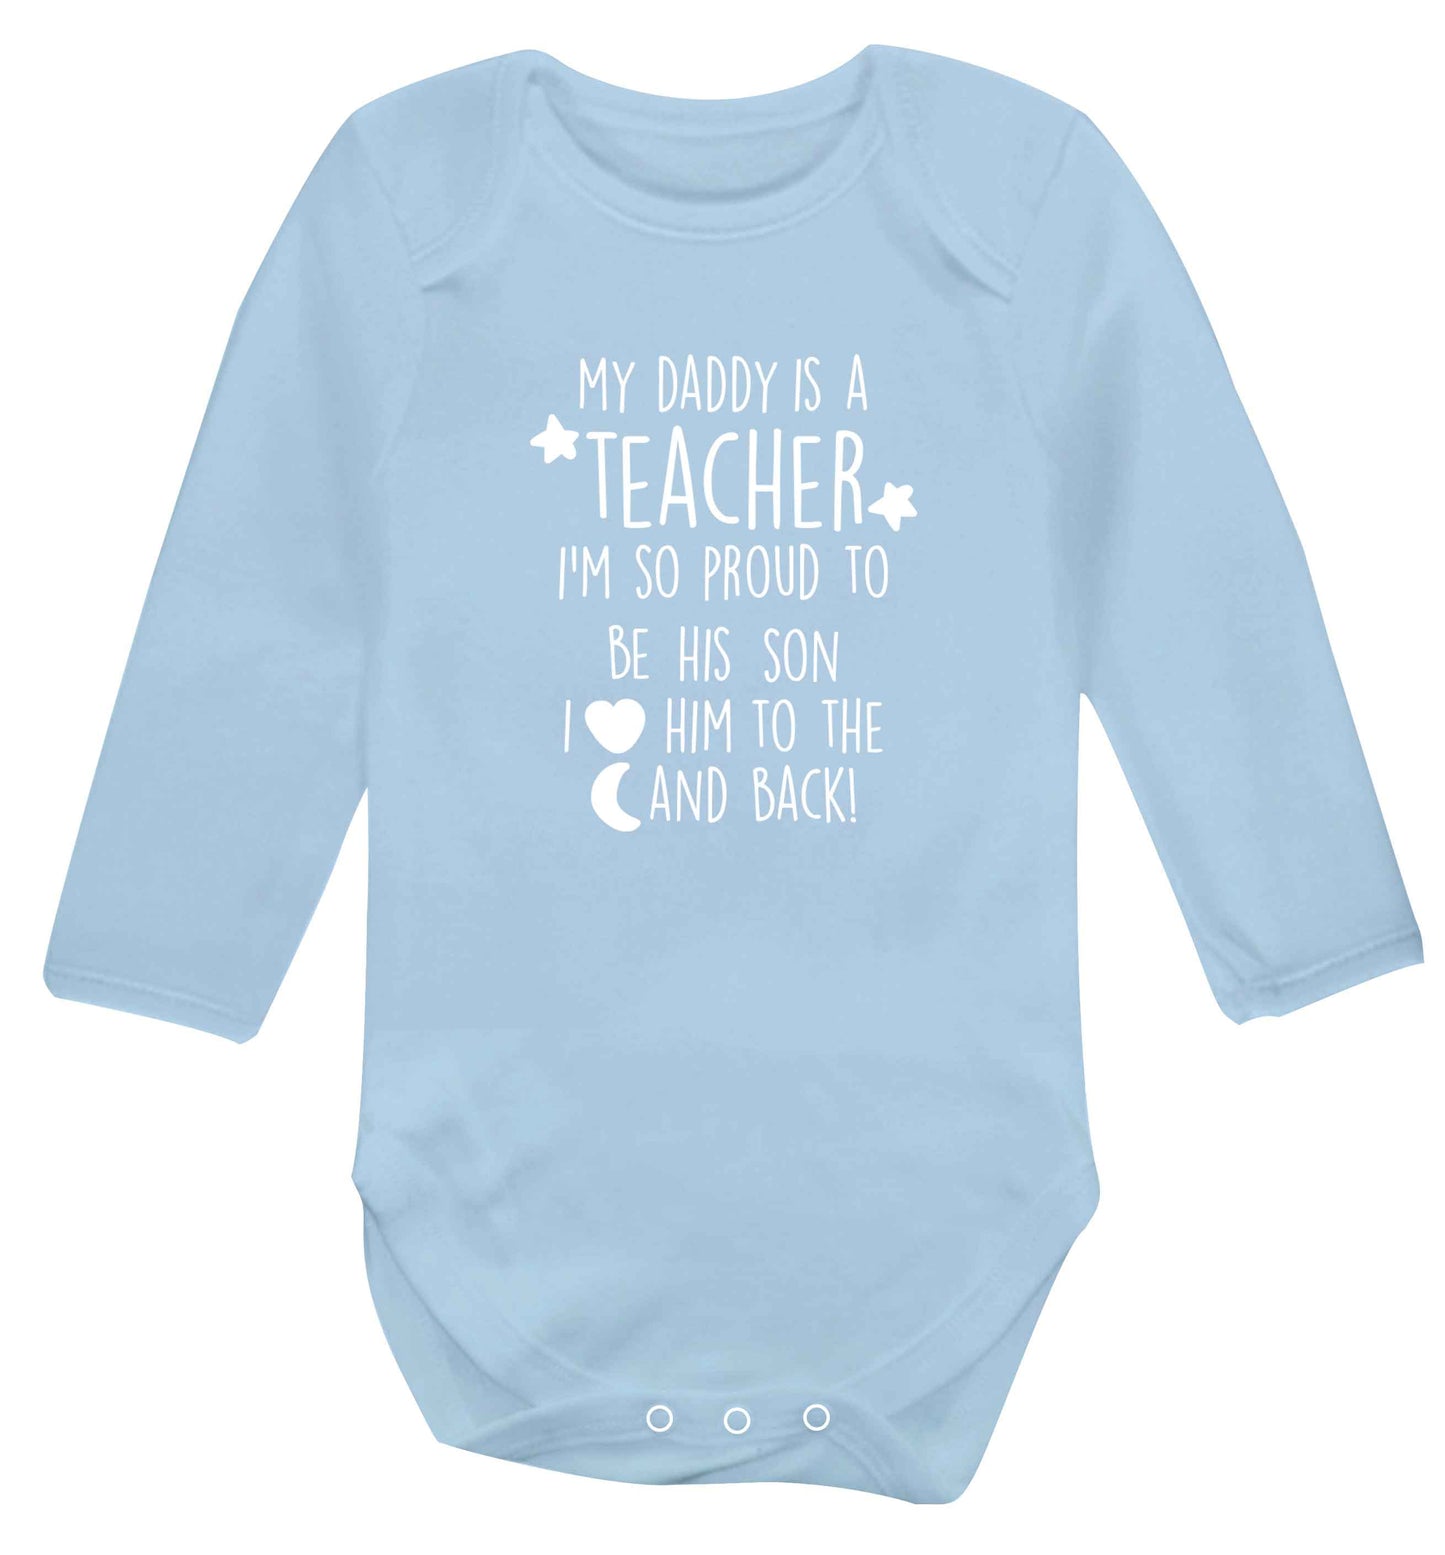 My daddy is a teacher I'm so proud to be his son I love her to the moon and back baby vest long sleeved pale blue 6-12 months